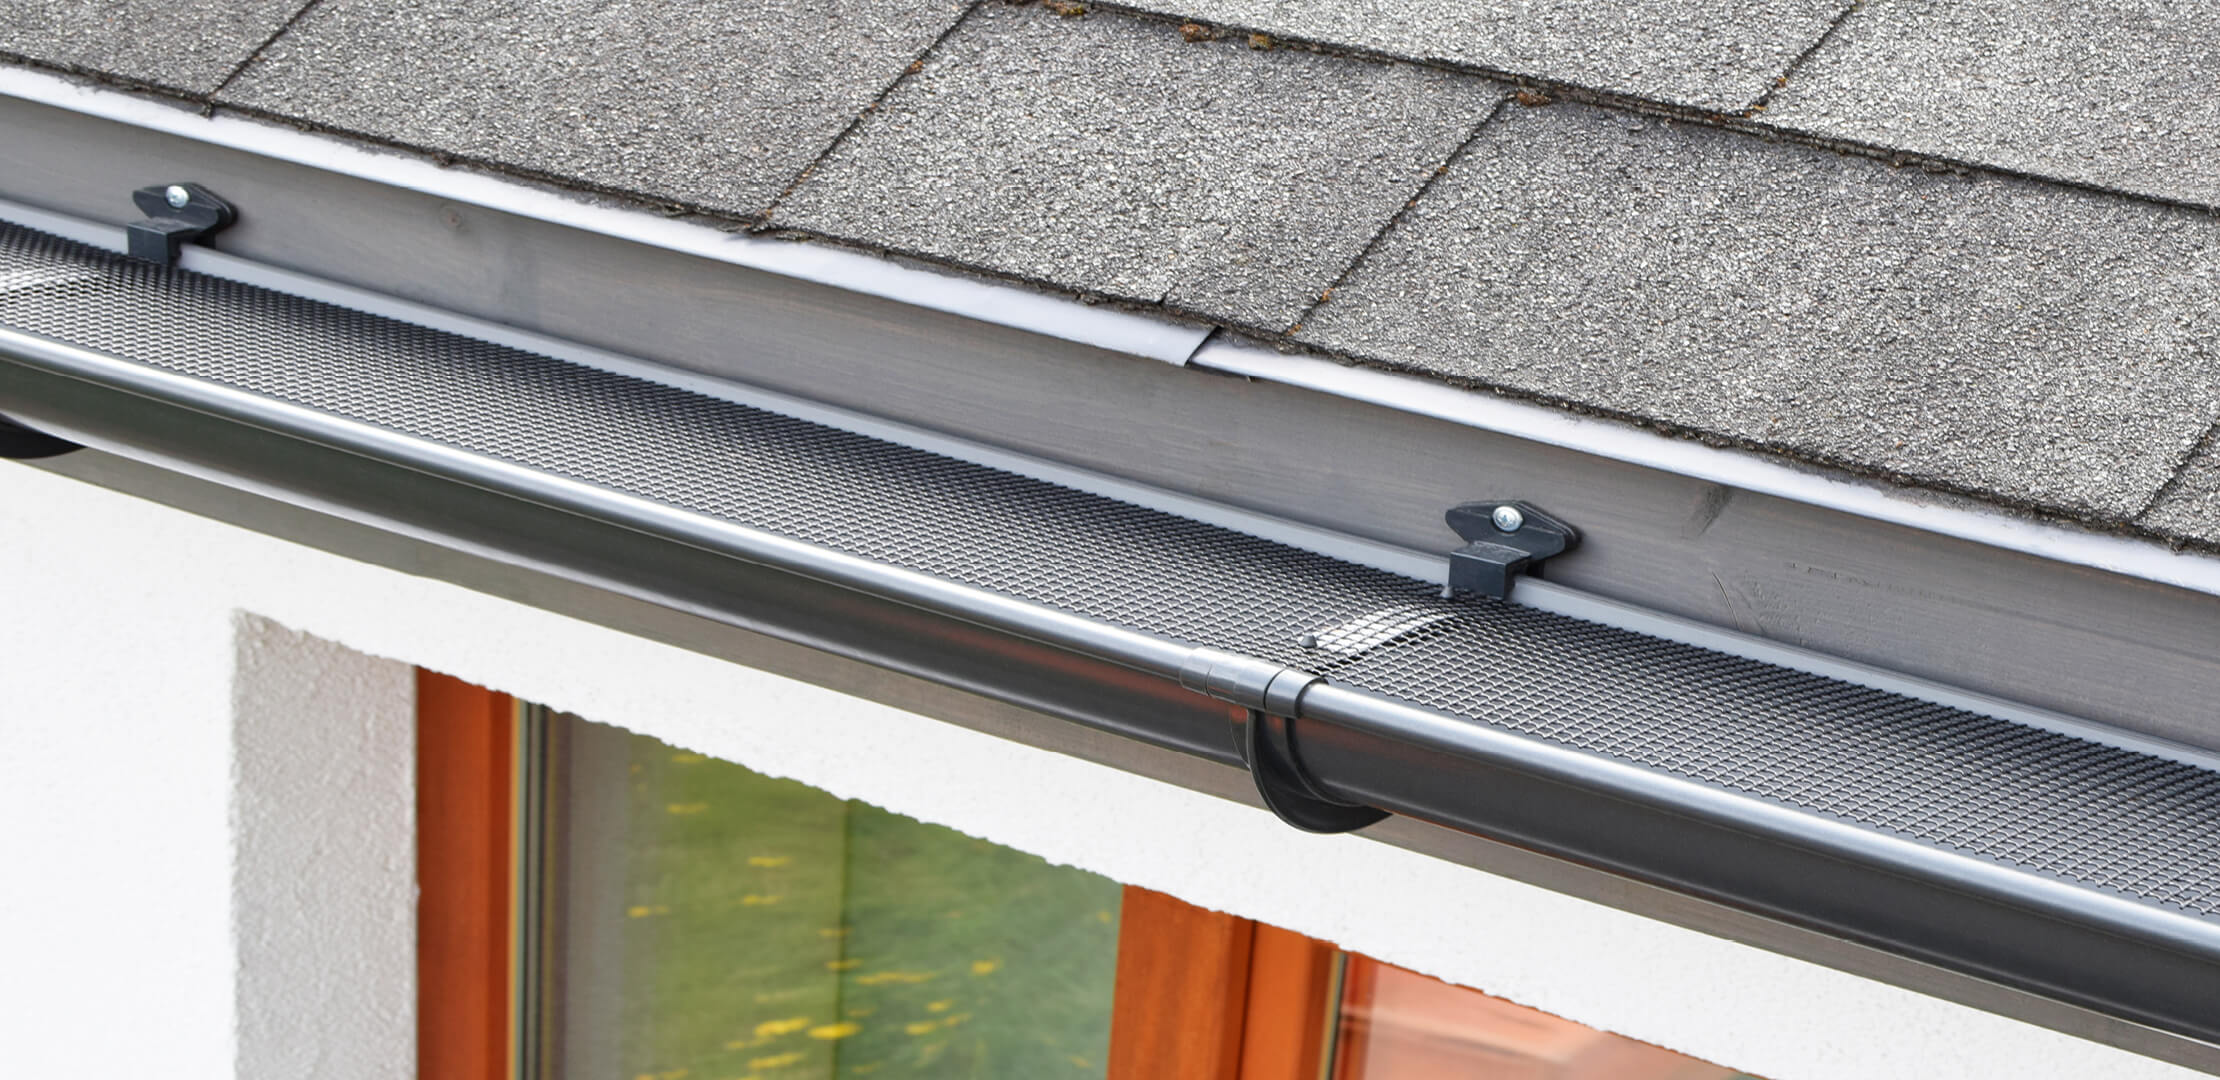 A gutter on a home with gutter guards